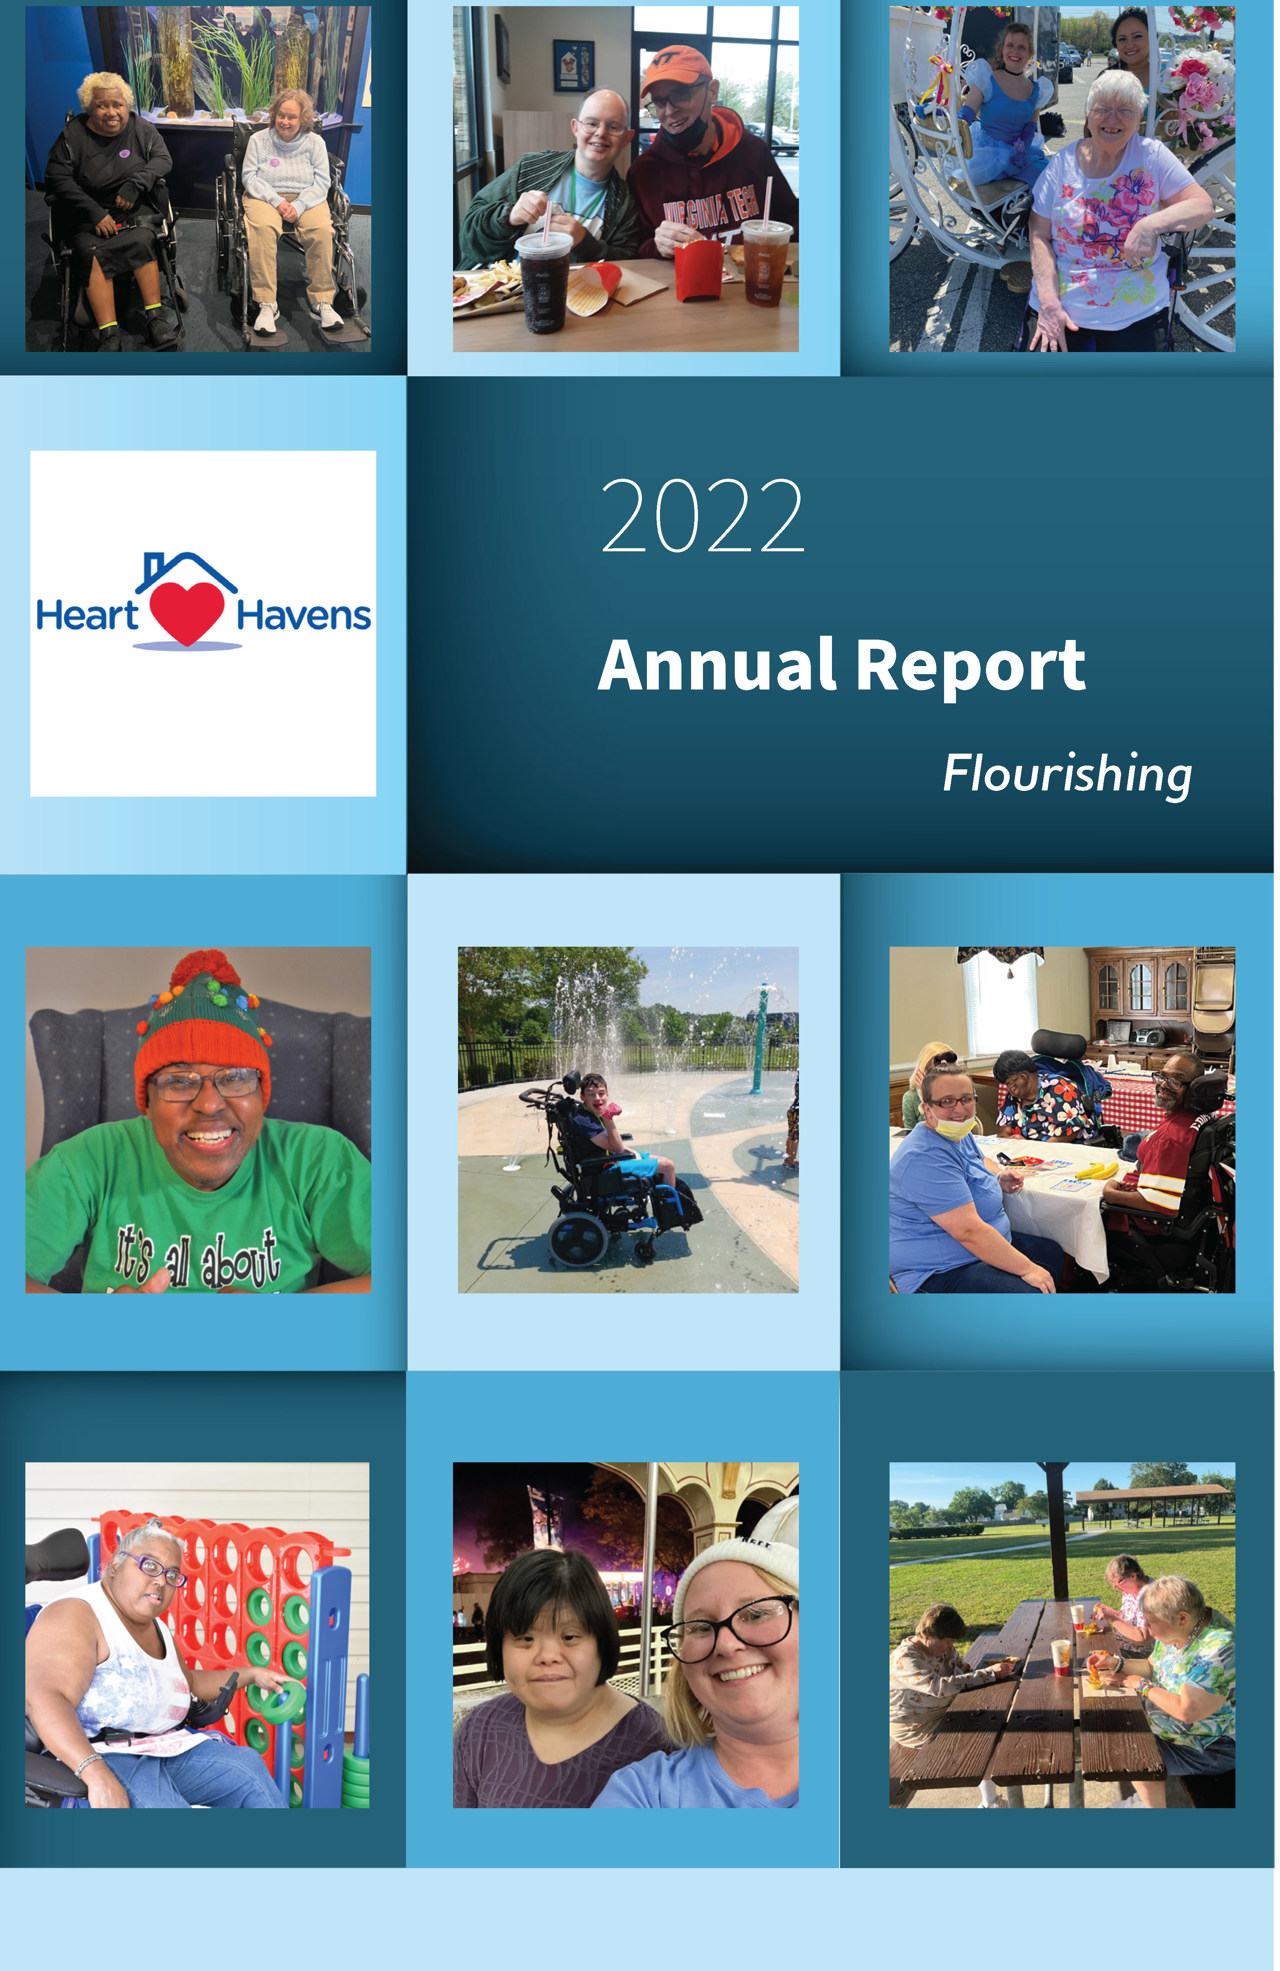 Annual report cover titled - Flourishing 2022 with a blue grid design and pictures of different scenes of residents out in the community